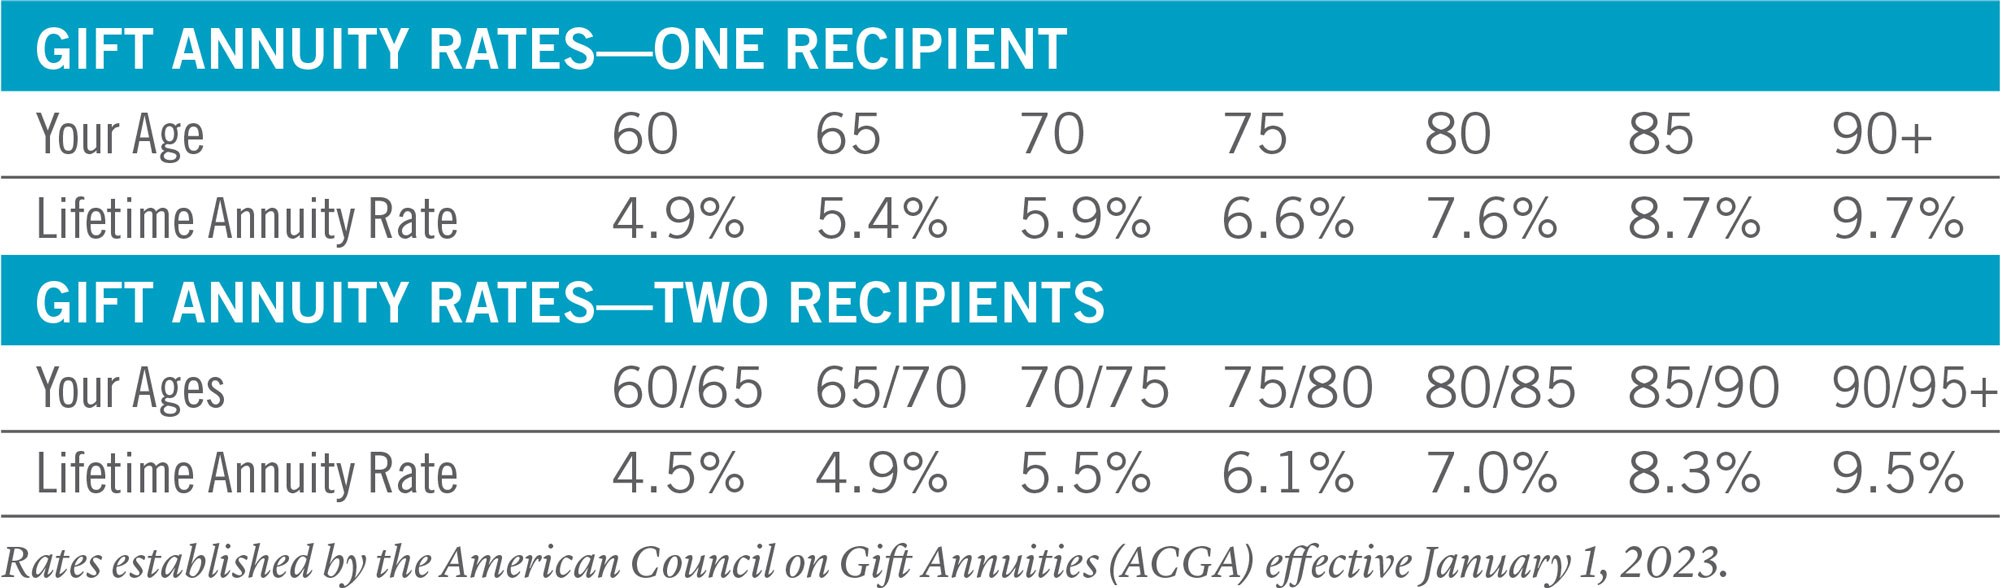 Annuity Chart showing results for one recipient vs. two recipient.